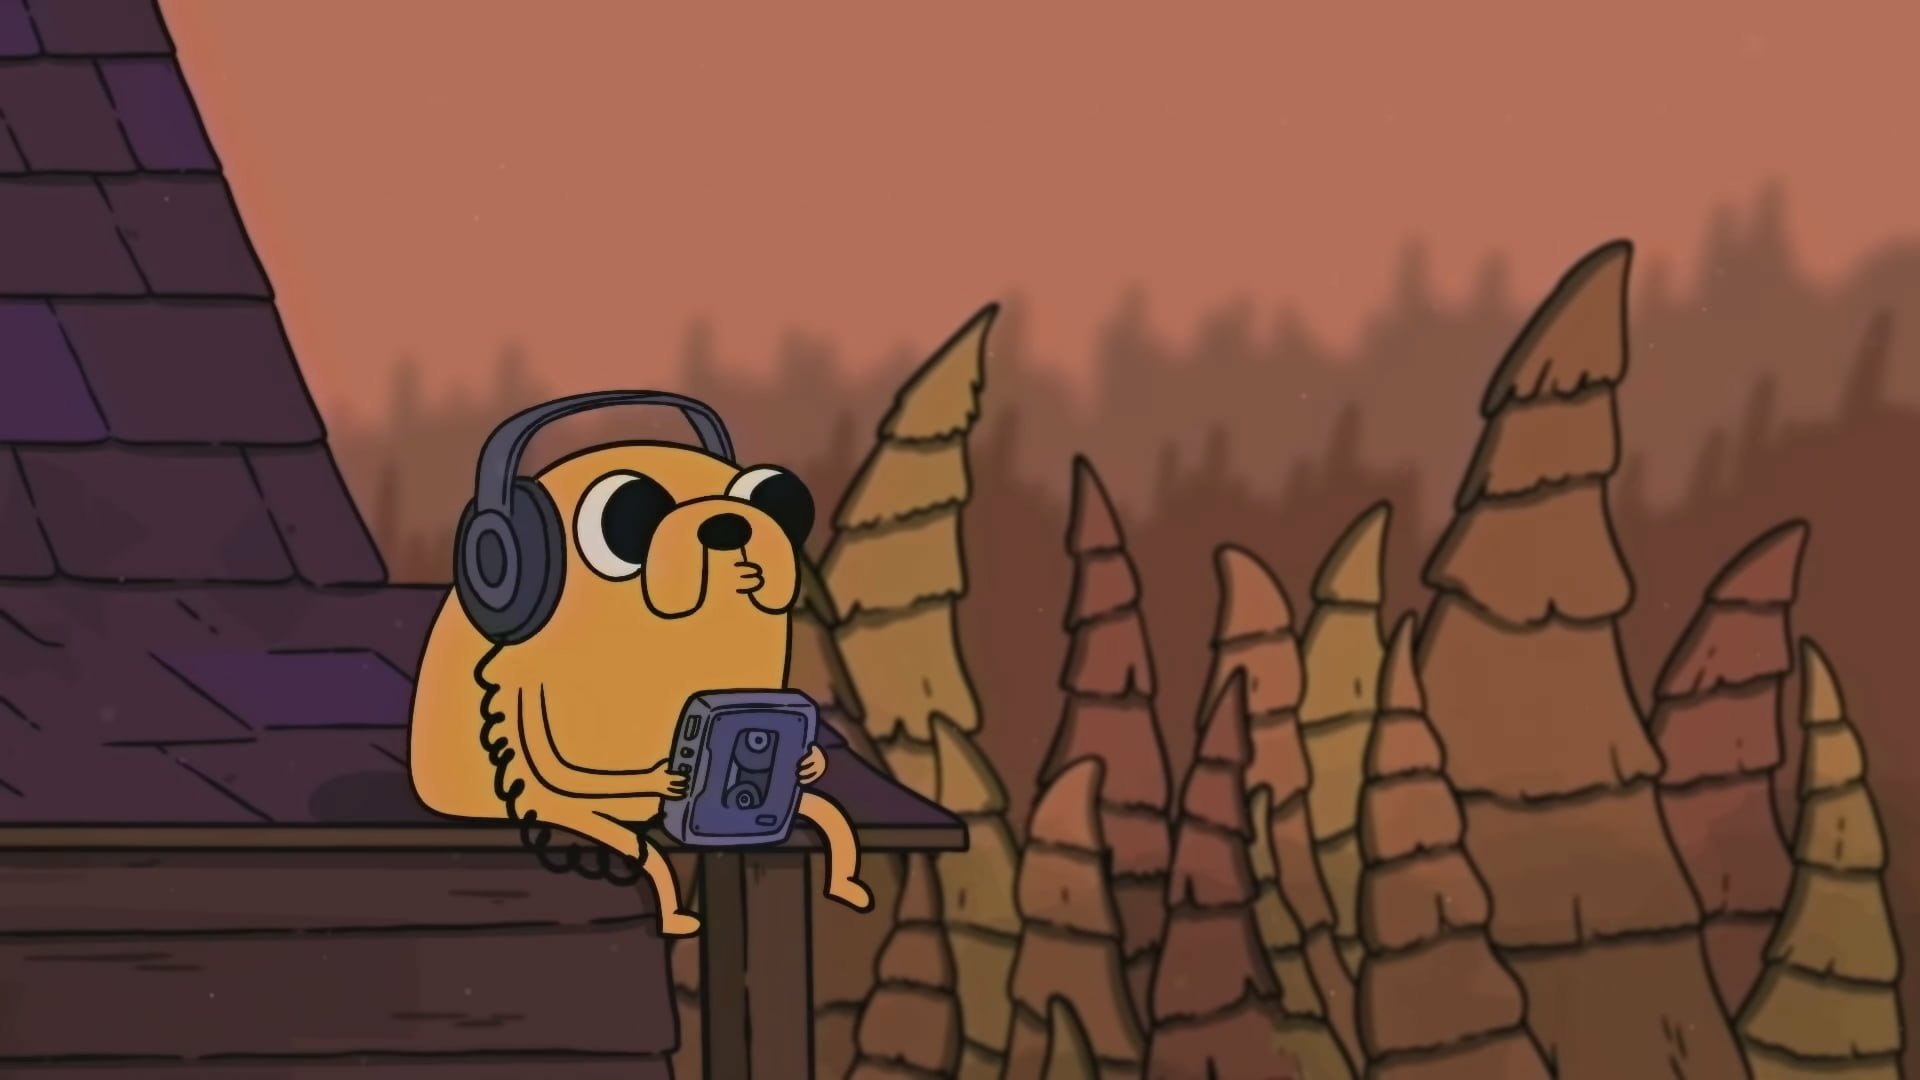 HD desktop wallpaper from Adventure Time featuring Jake the dog wearing headphones and holding a video game controller, set against a twilight landscape.